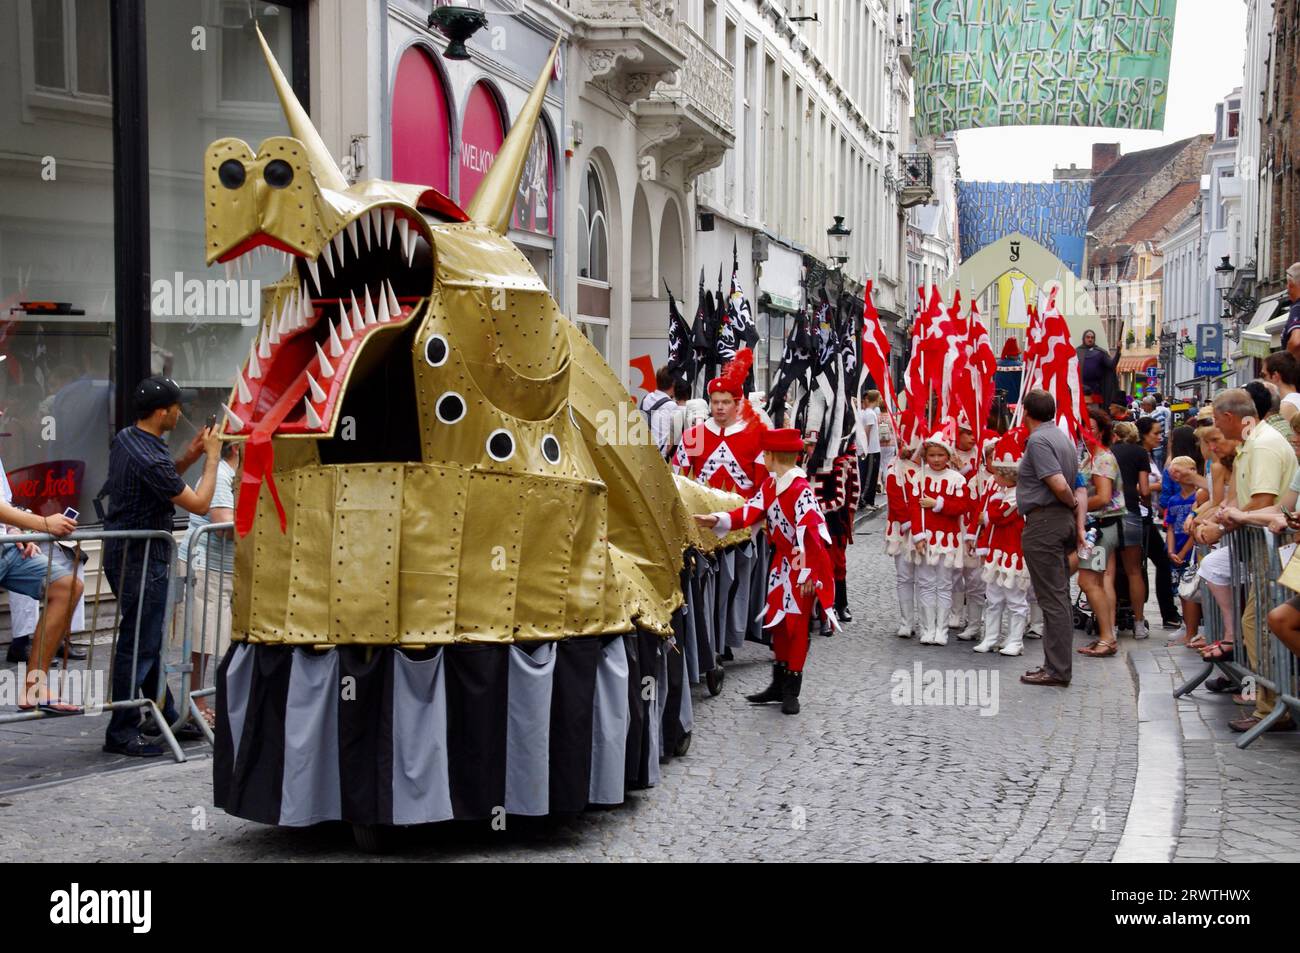 Marchers with a dragon in The 2012 Procession of the Golden Tree Pageant, held every 5 years since 1958. Bruges, Belgium Stock Photo